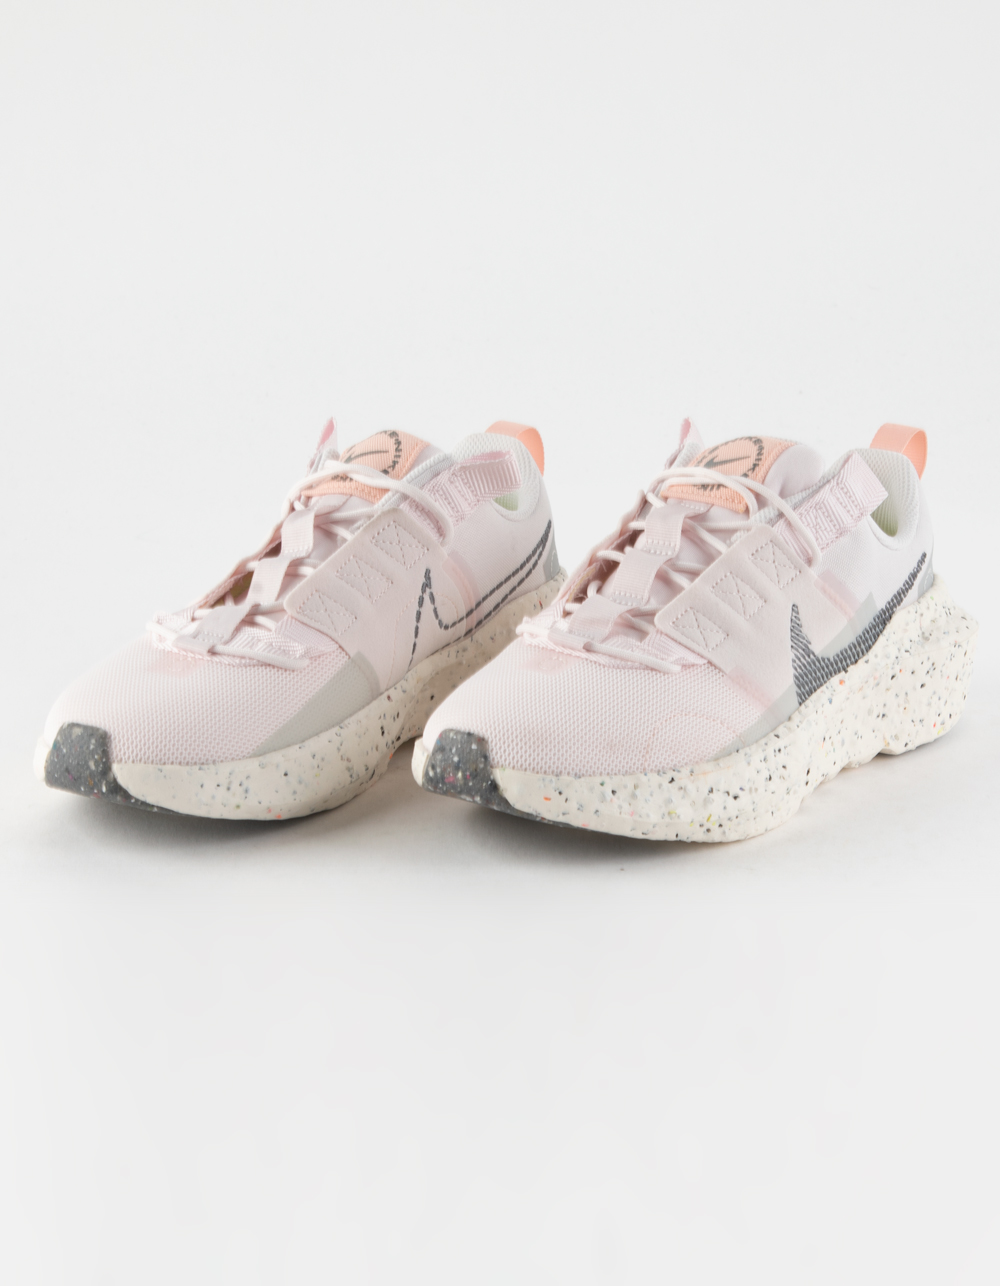 nike crater impact womens shoes pink